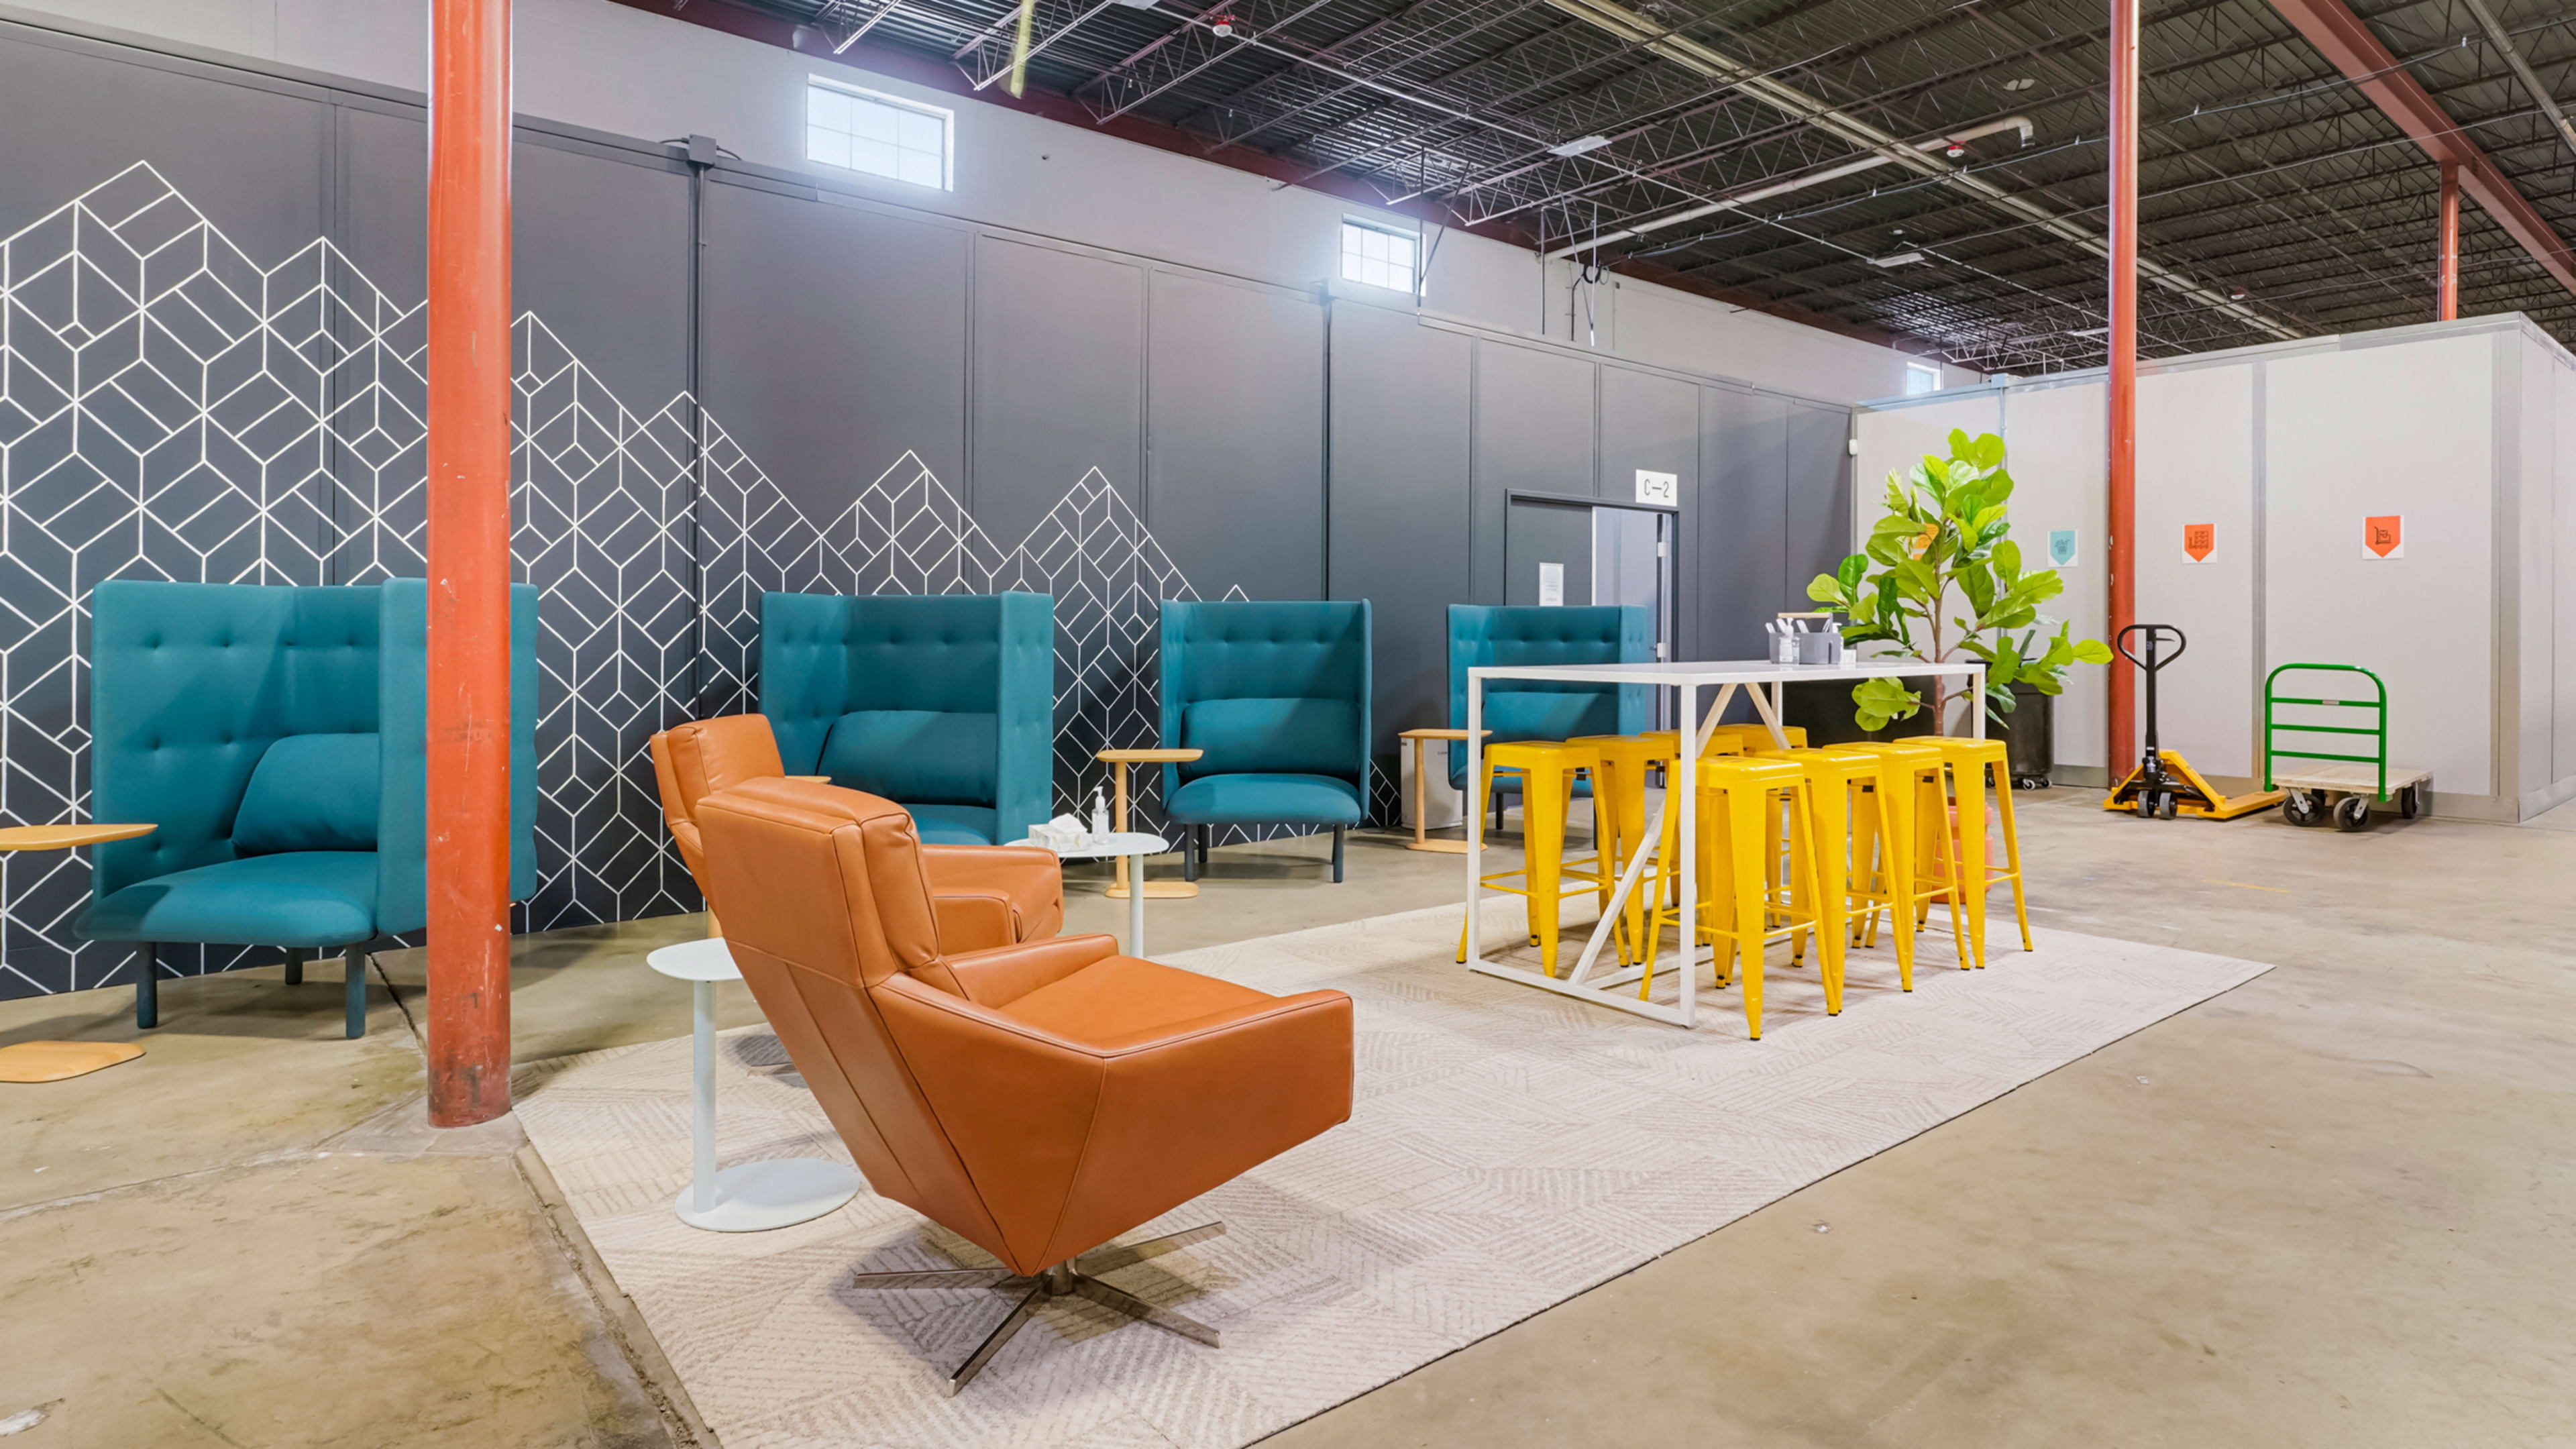 Why these 100,000-square-foot warehouses are designed like hip coworking spaces